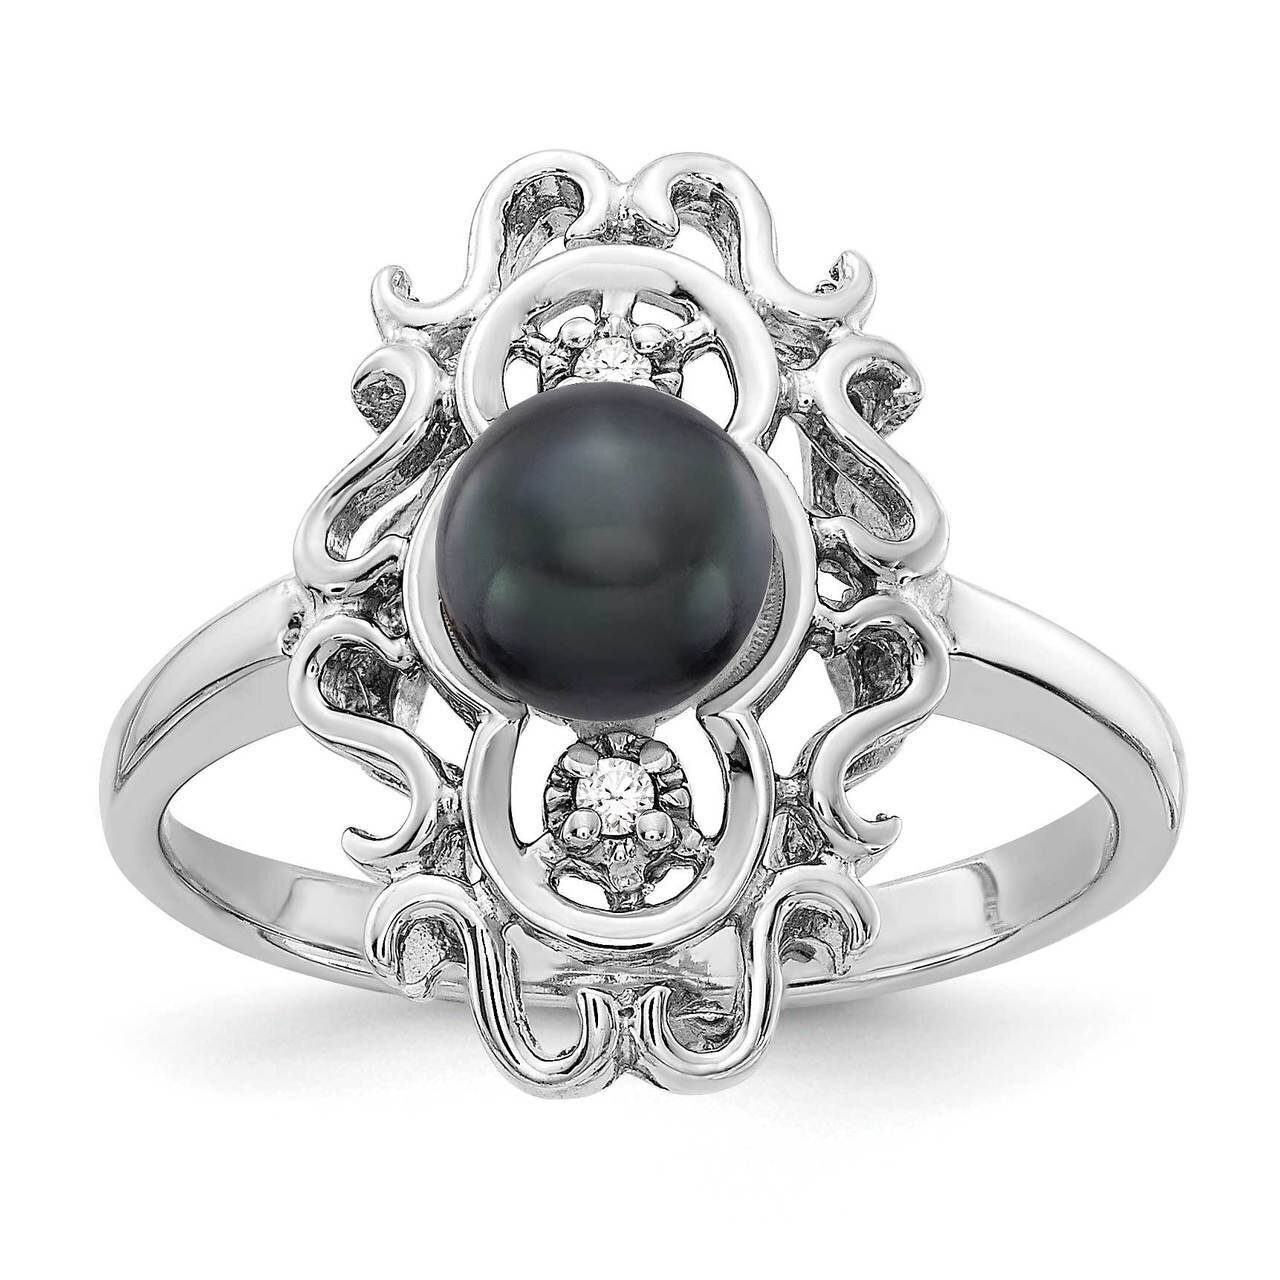 5.5mm Black Freshwater Cultured Pearl Diamond Ring 14k White Gold Y1907BP_AA